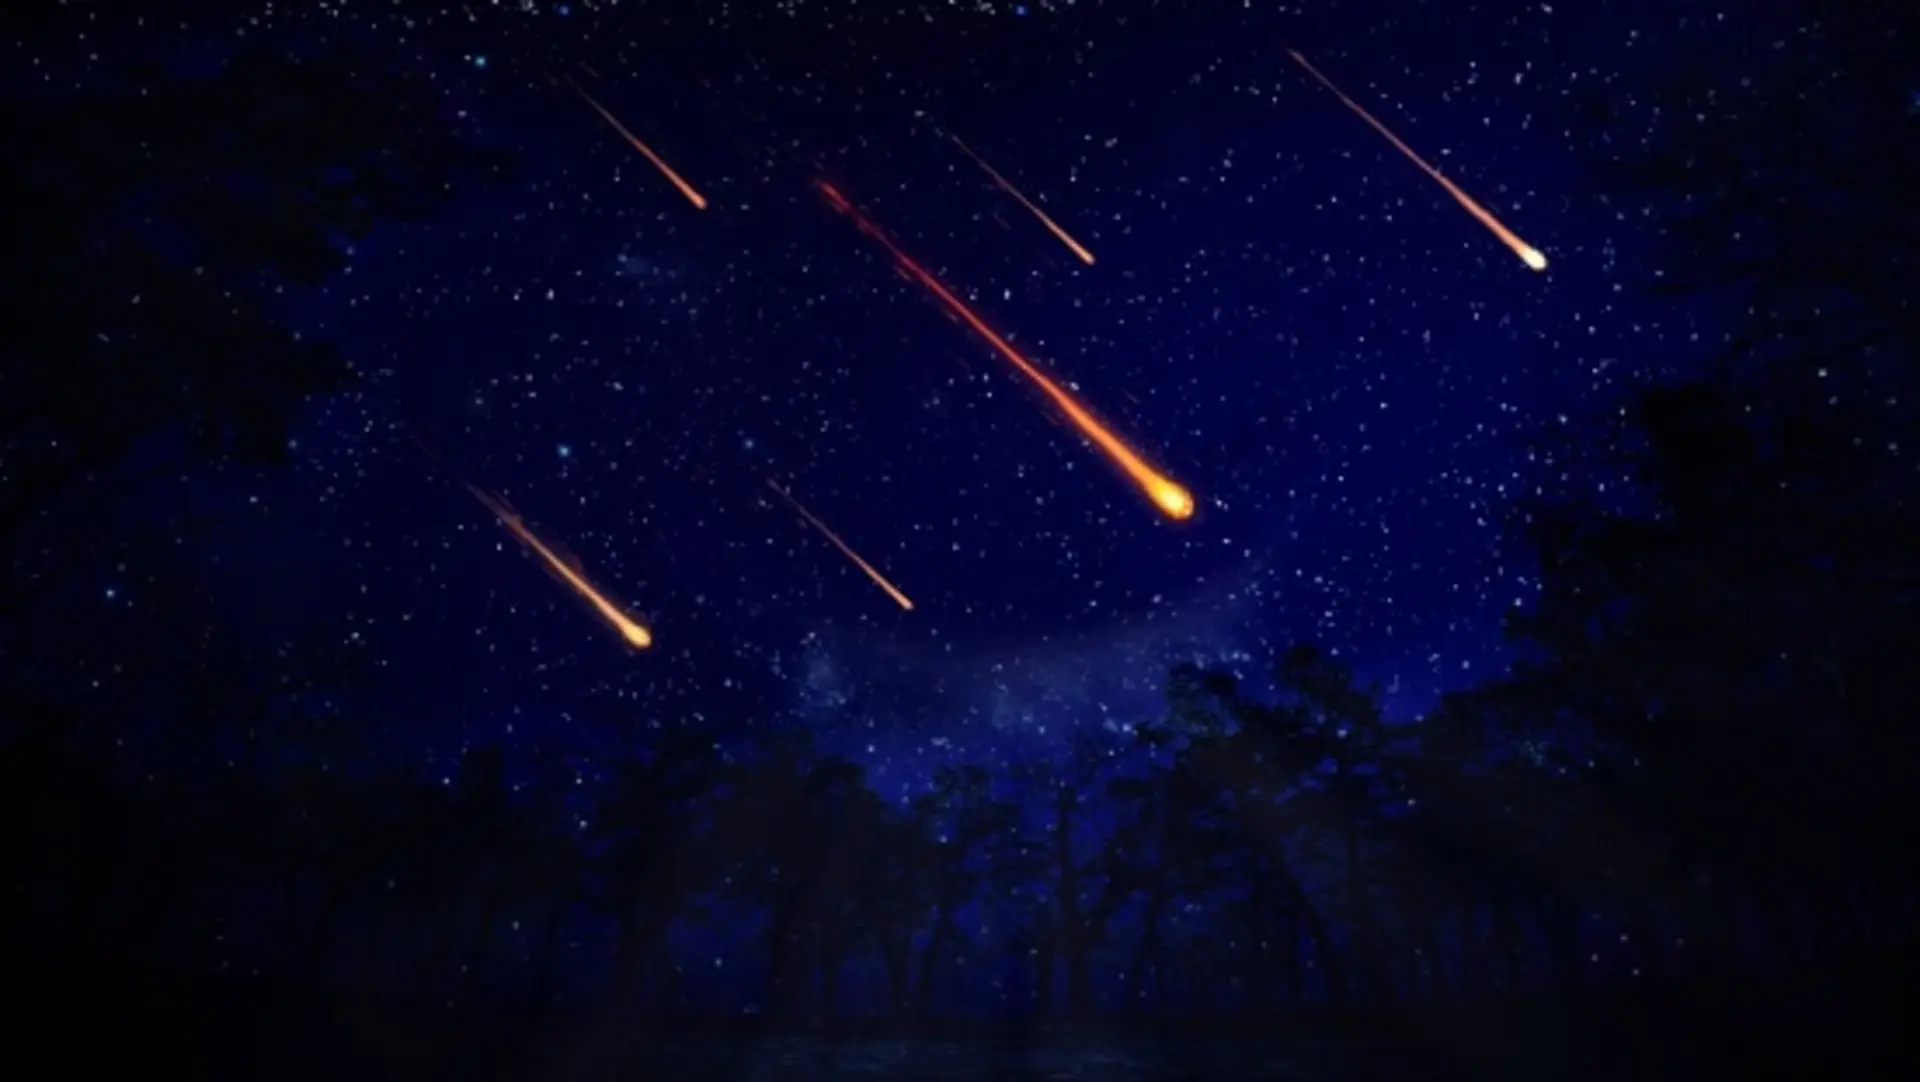 Keep your eyes to the sky! Fall is meteor shower season!